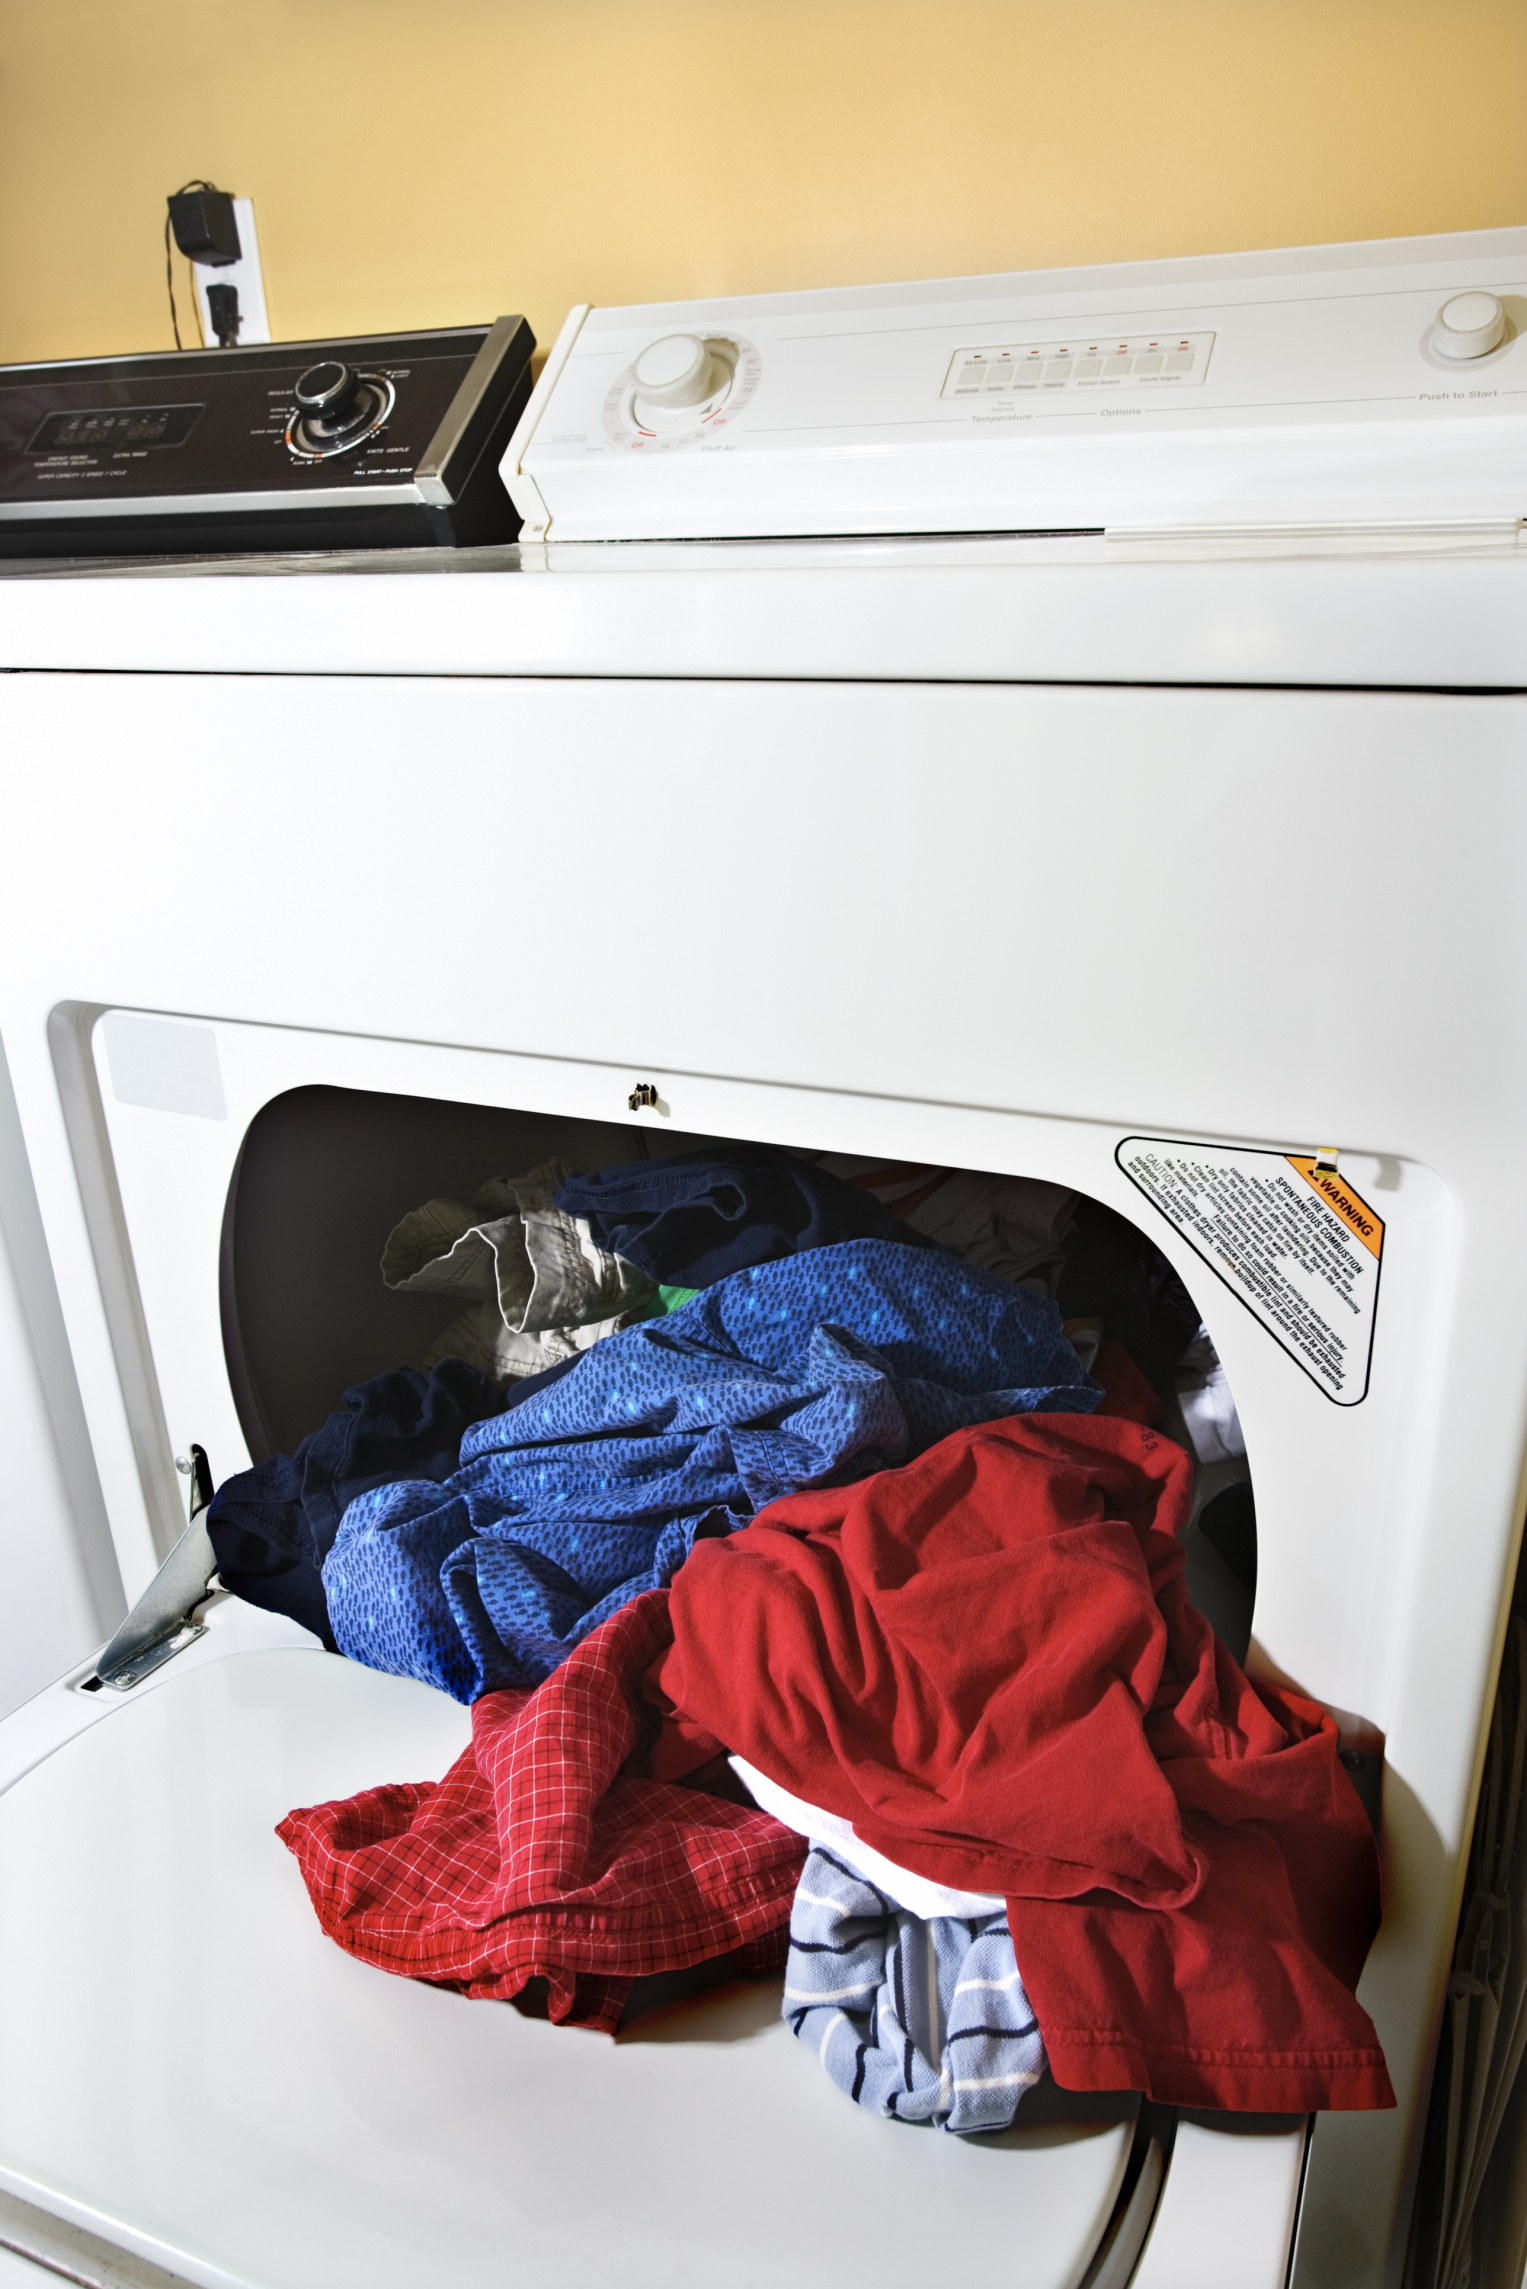 How to Fix a Washer That's Off Track